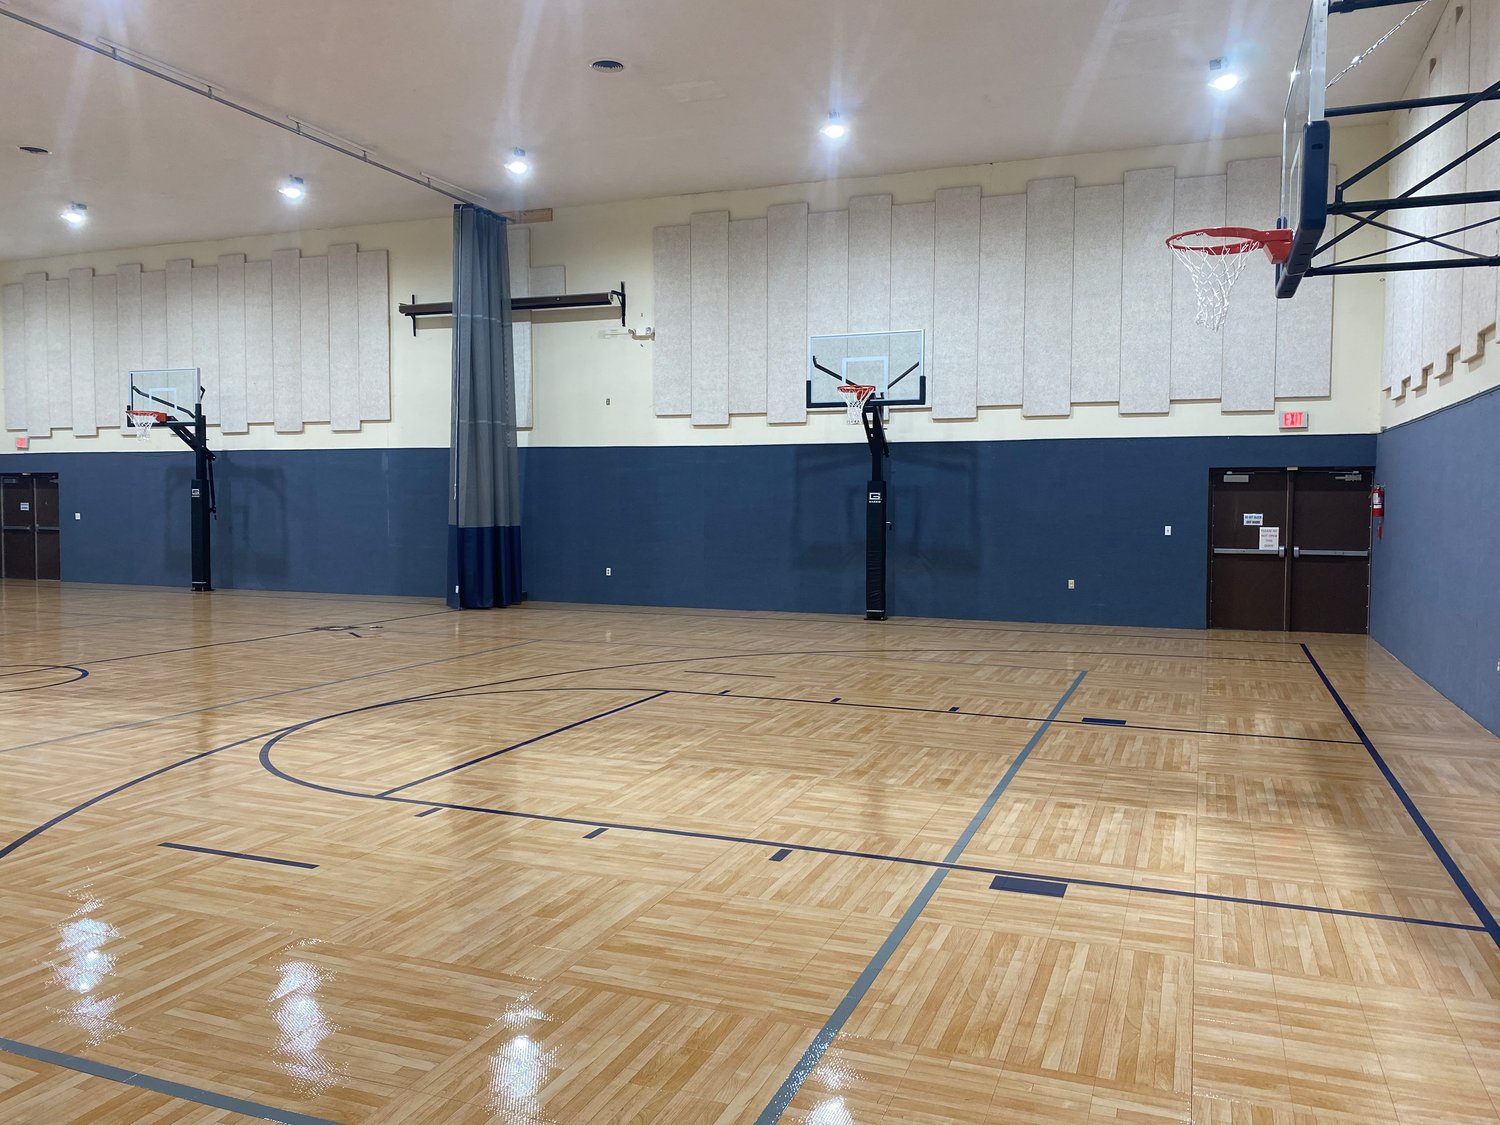 New Hope Church's gym can host multiple sporting events including basketball, volleyball, and even pickleball.